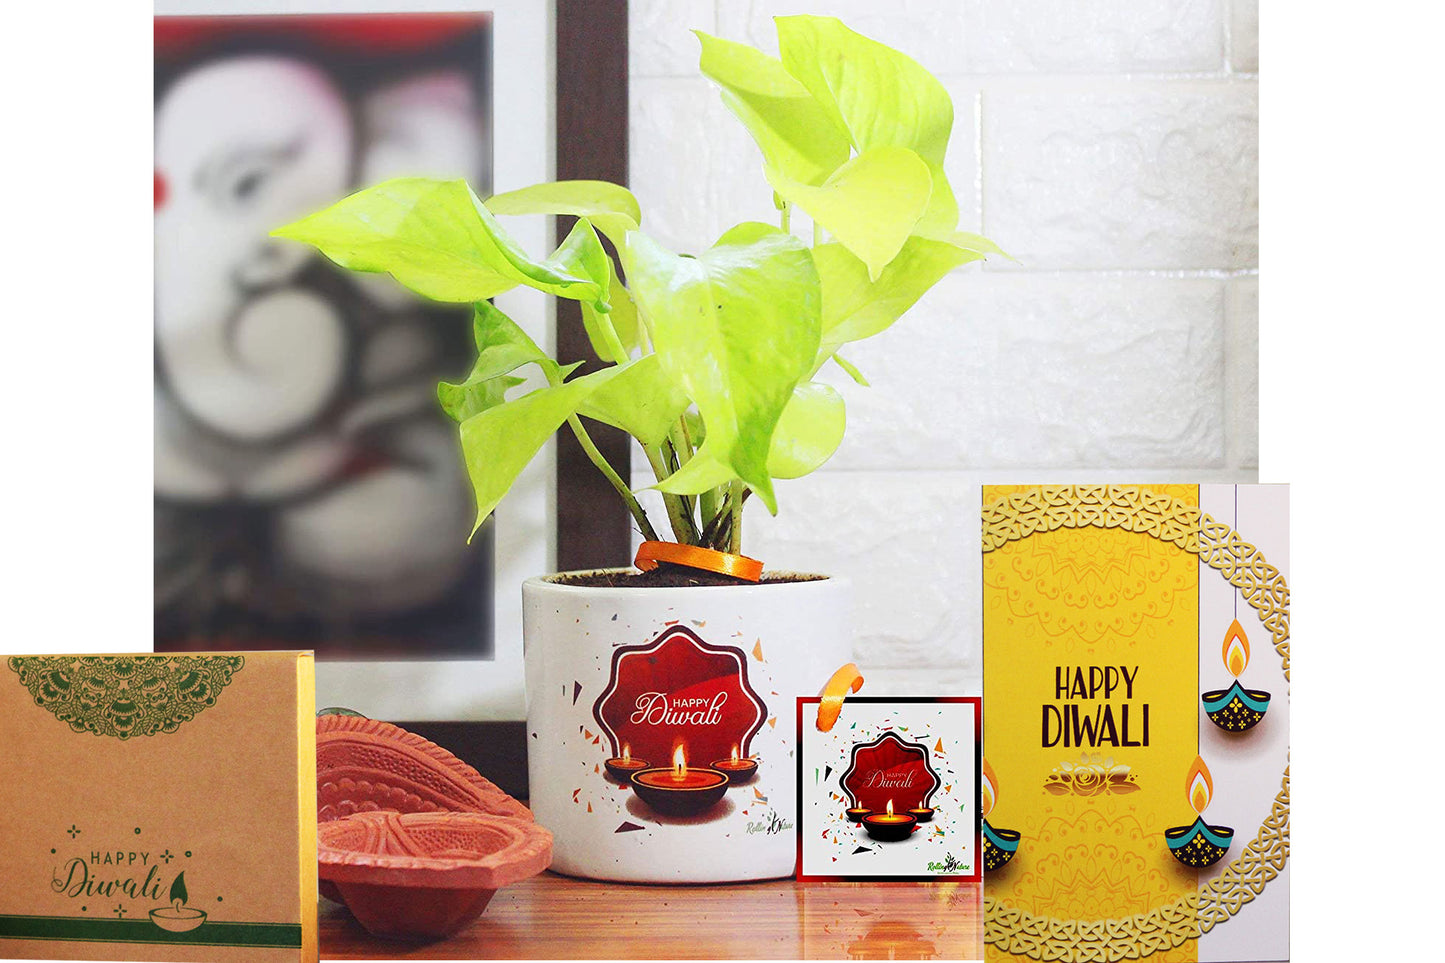 Rolling Nature Diwali Gift Combo of Air Purifying Good Luck Golden Pothos Plant in White Barrel Happy Diwali Divine Ceramic Pot